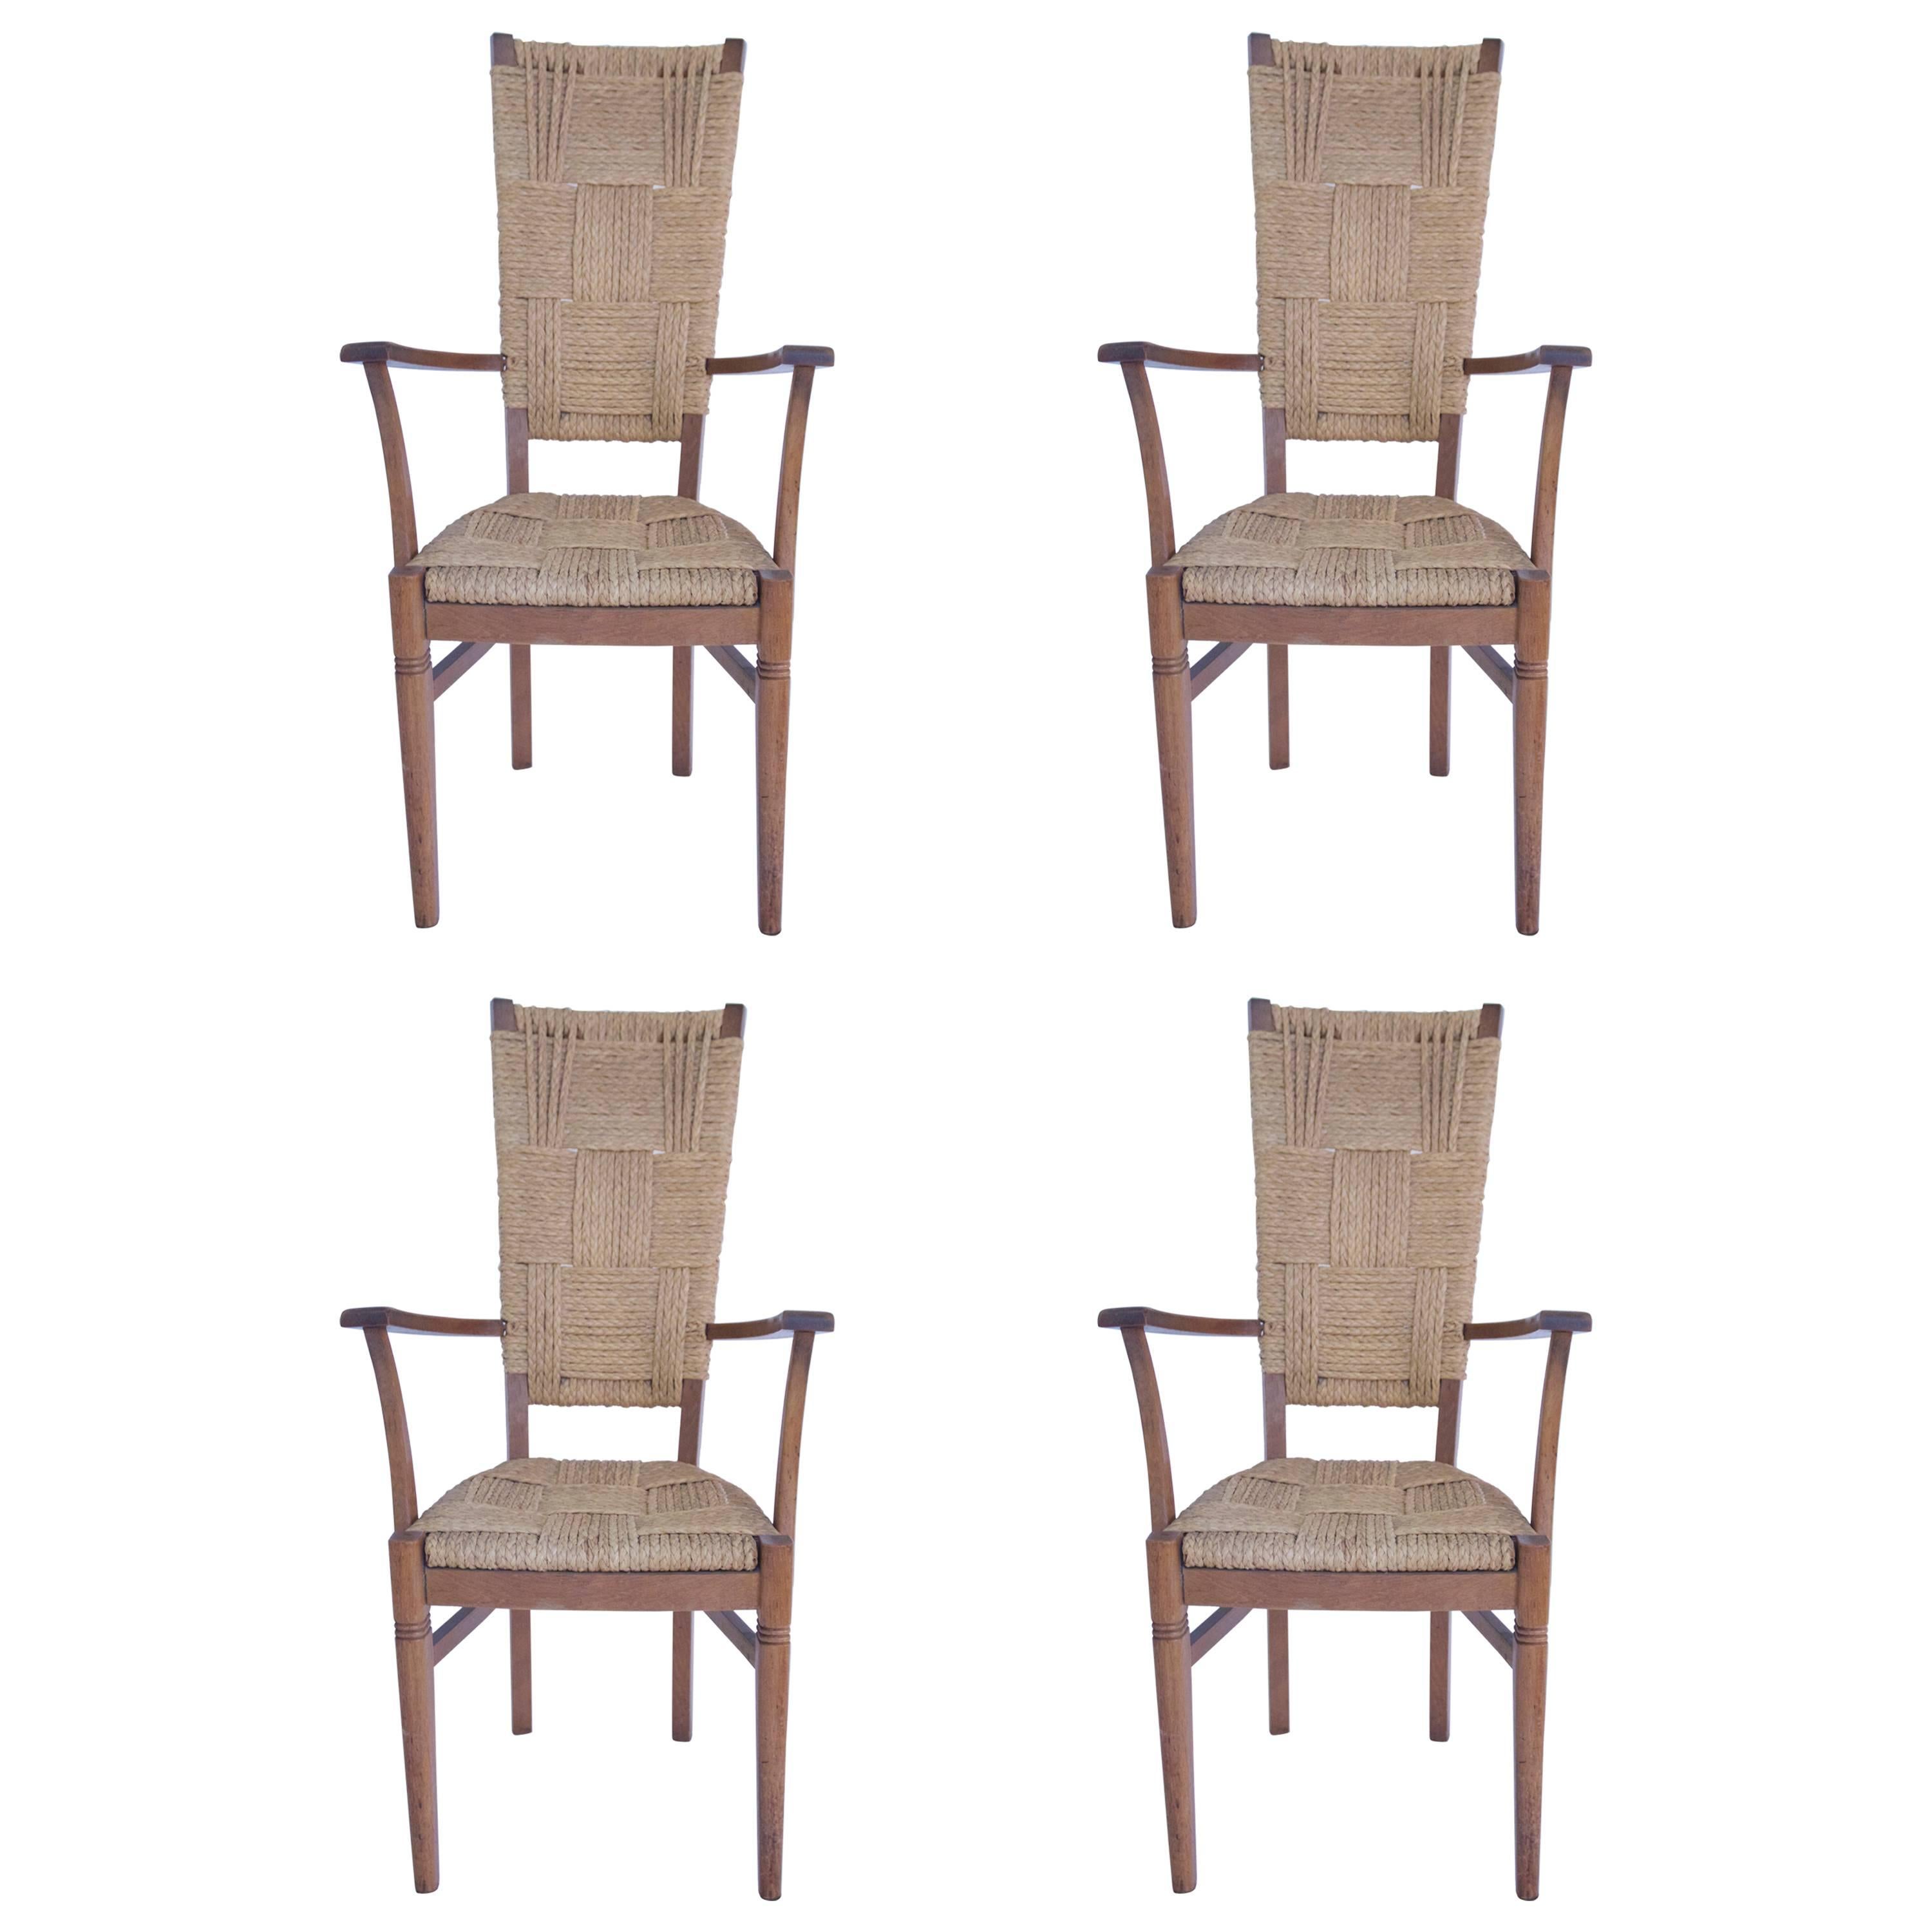 Audoux-Minet, Suite of Four Armchairs, Rattan and Wood, circa 1970, France